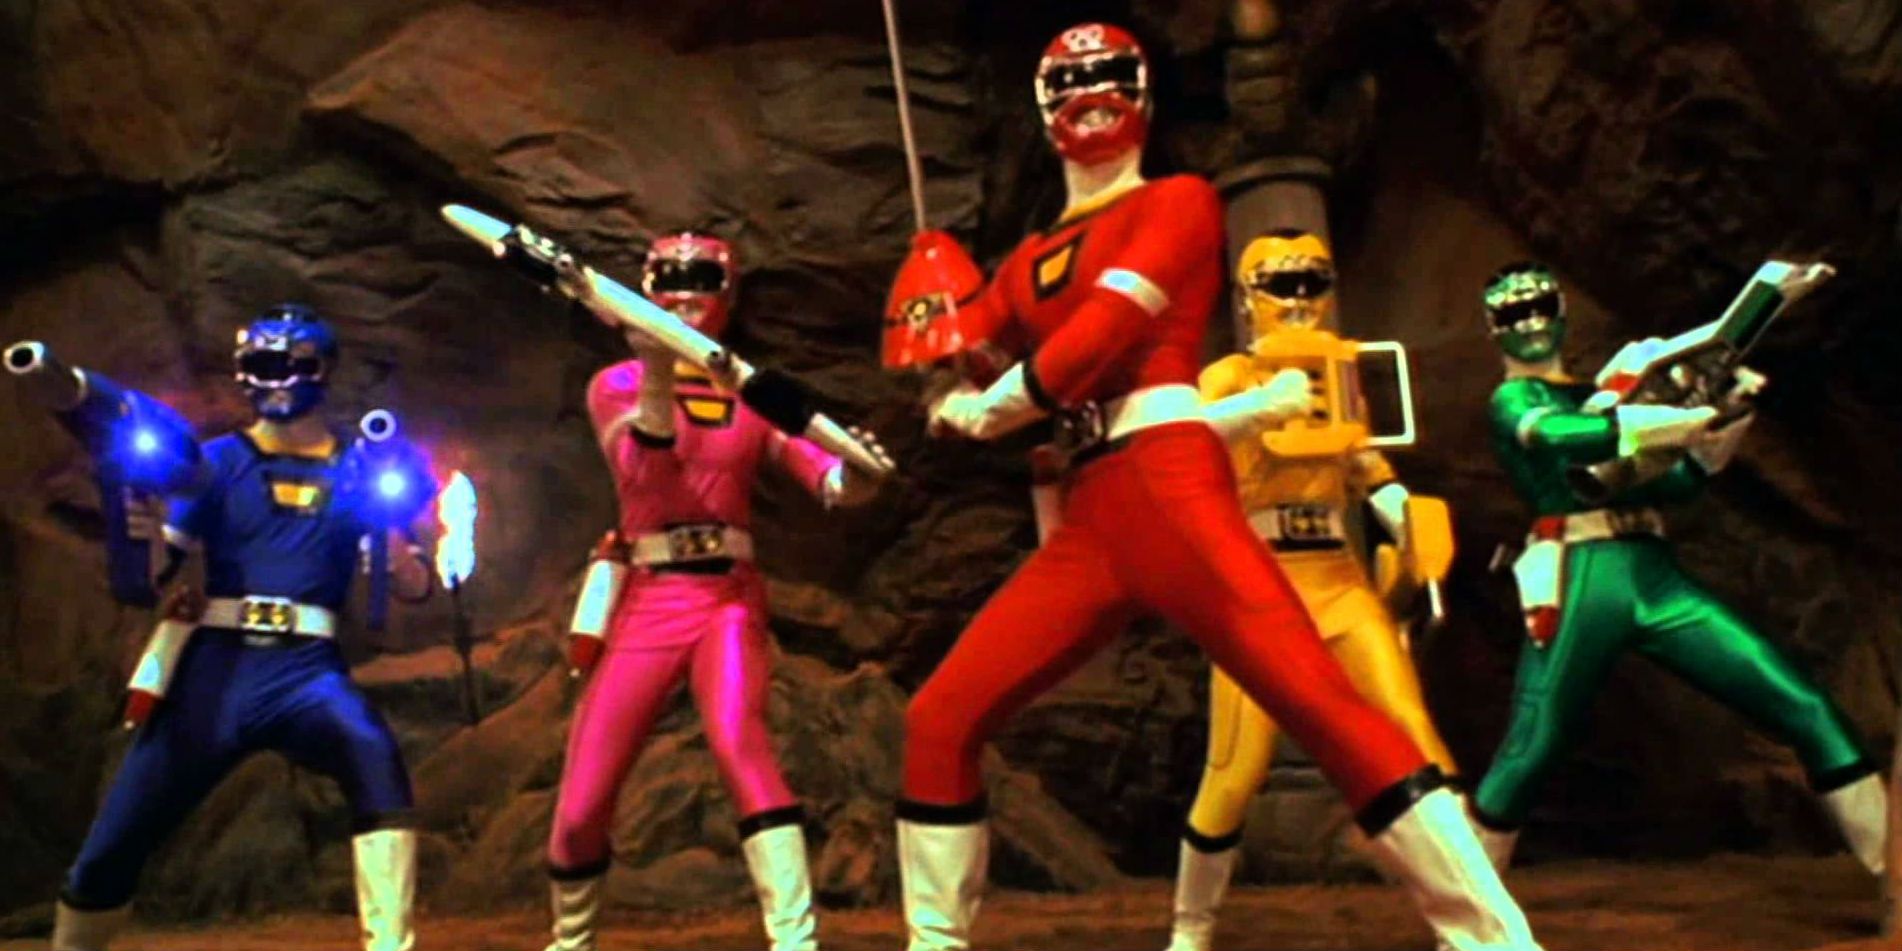 The Turbo team in Turbo: A Power Rangers Movie